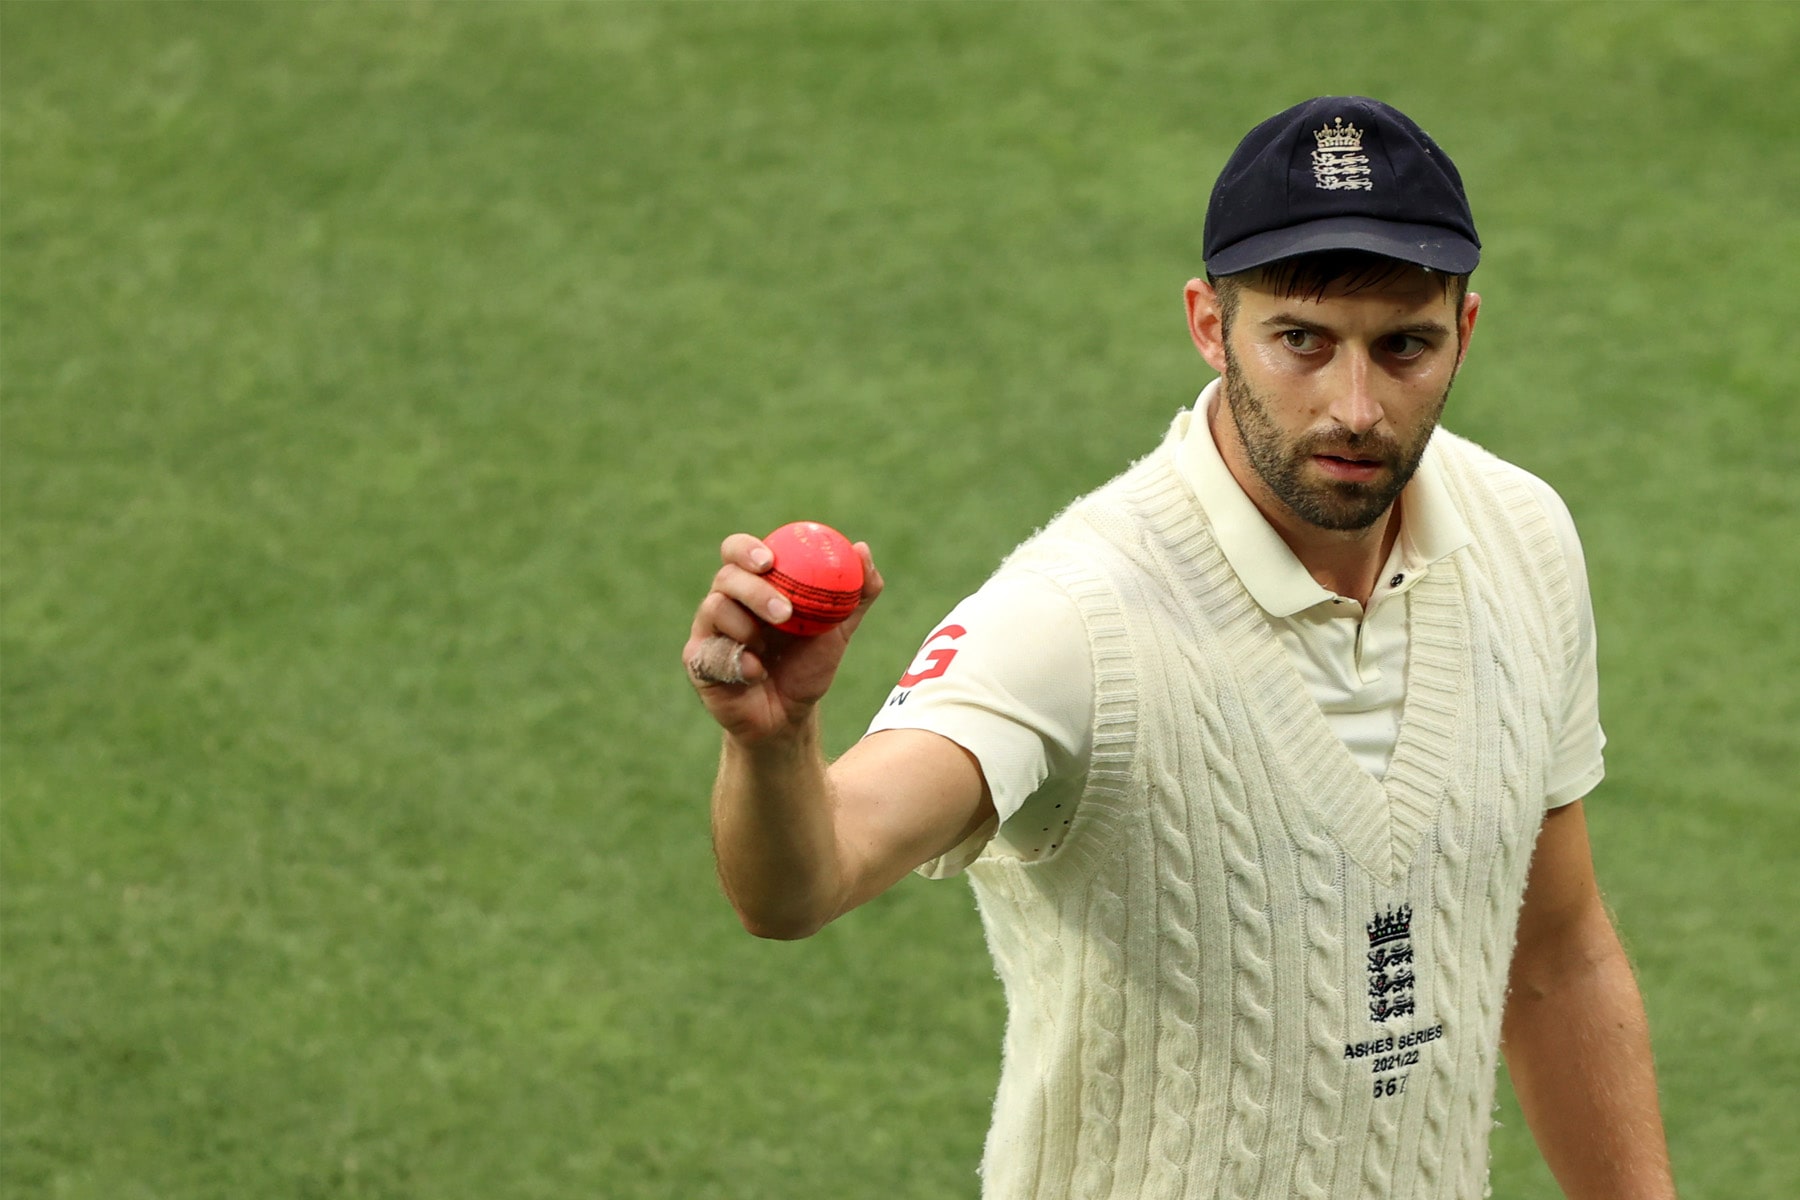 Wood leads Test MVP after Ashes